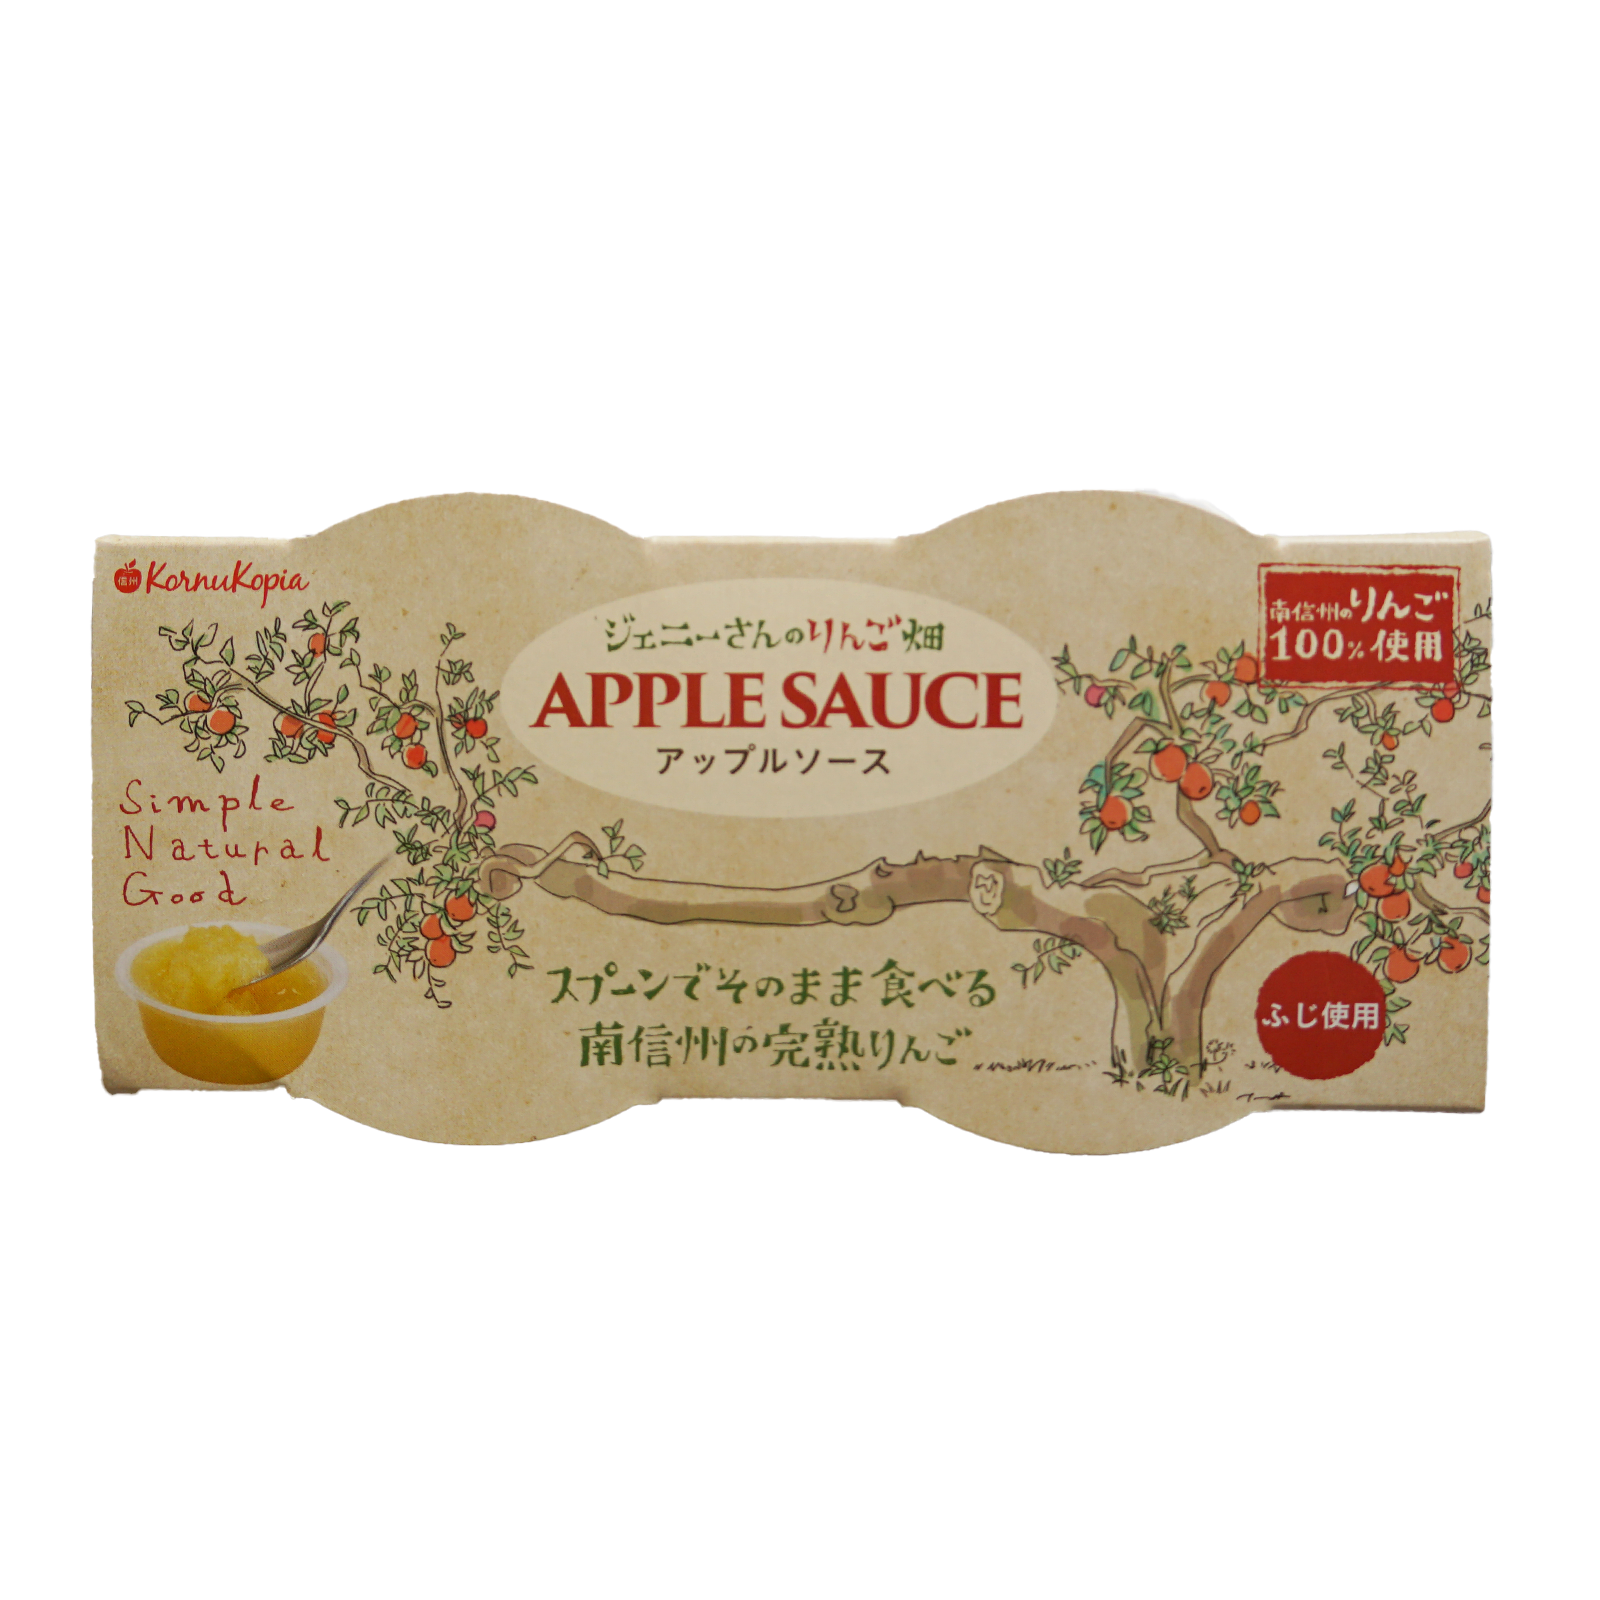 All-Natural Additive-Free Apple Sauce from Japan (73g x 6) - Horizon Farms